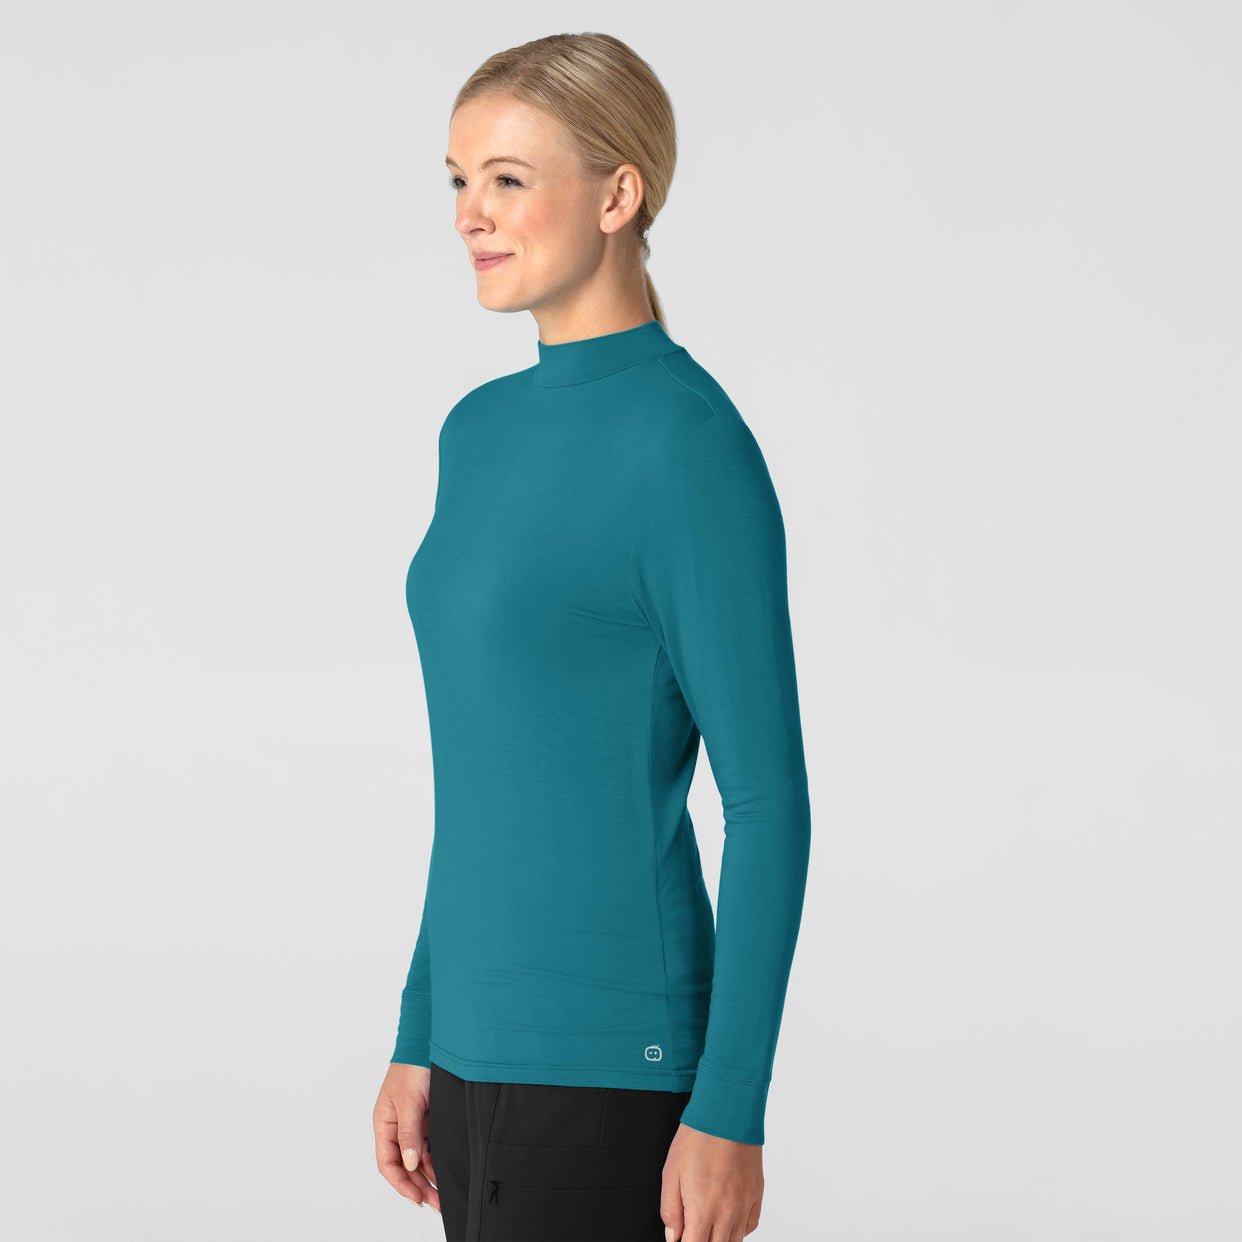 Knits and Layers Women’s Long Sleeve Mock Neck Silky Tee Bay Blue side view